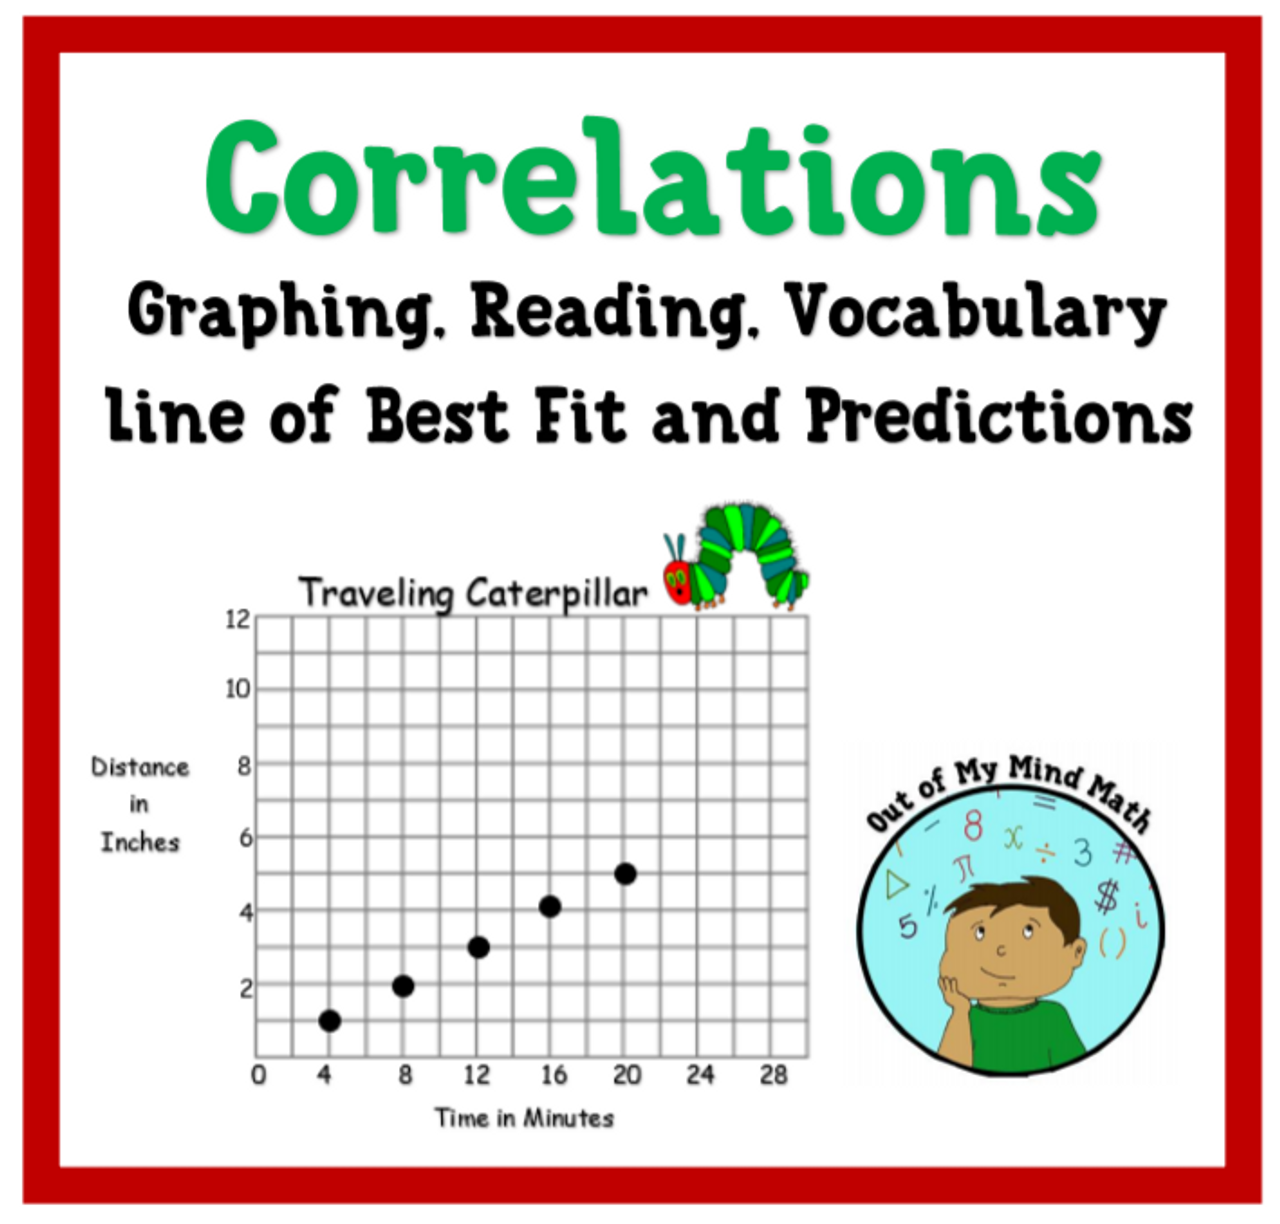 Correlations-Graphing, Reading, Vocabulary, Line of Best Fit and Predictions